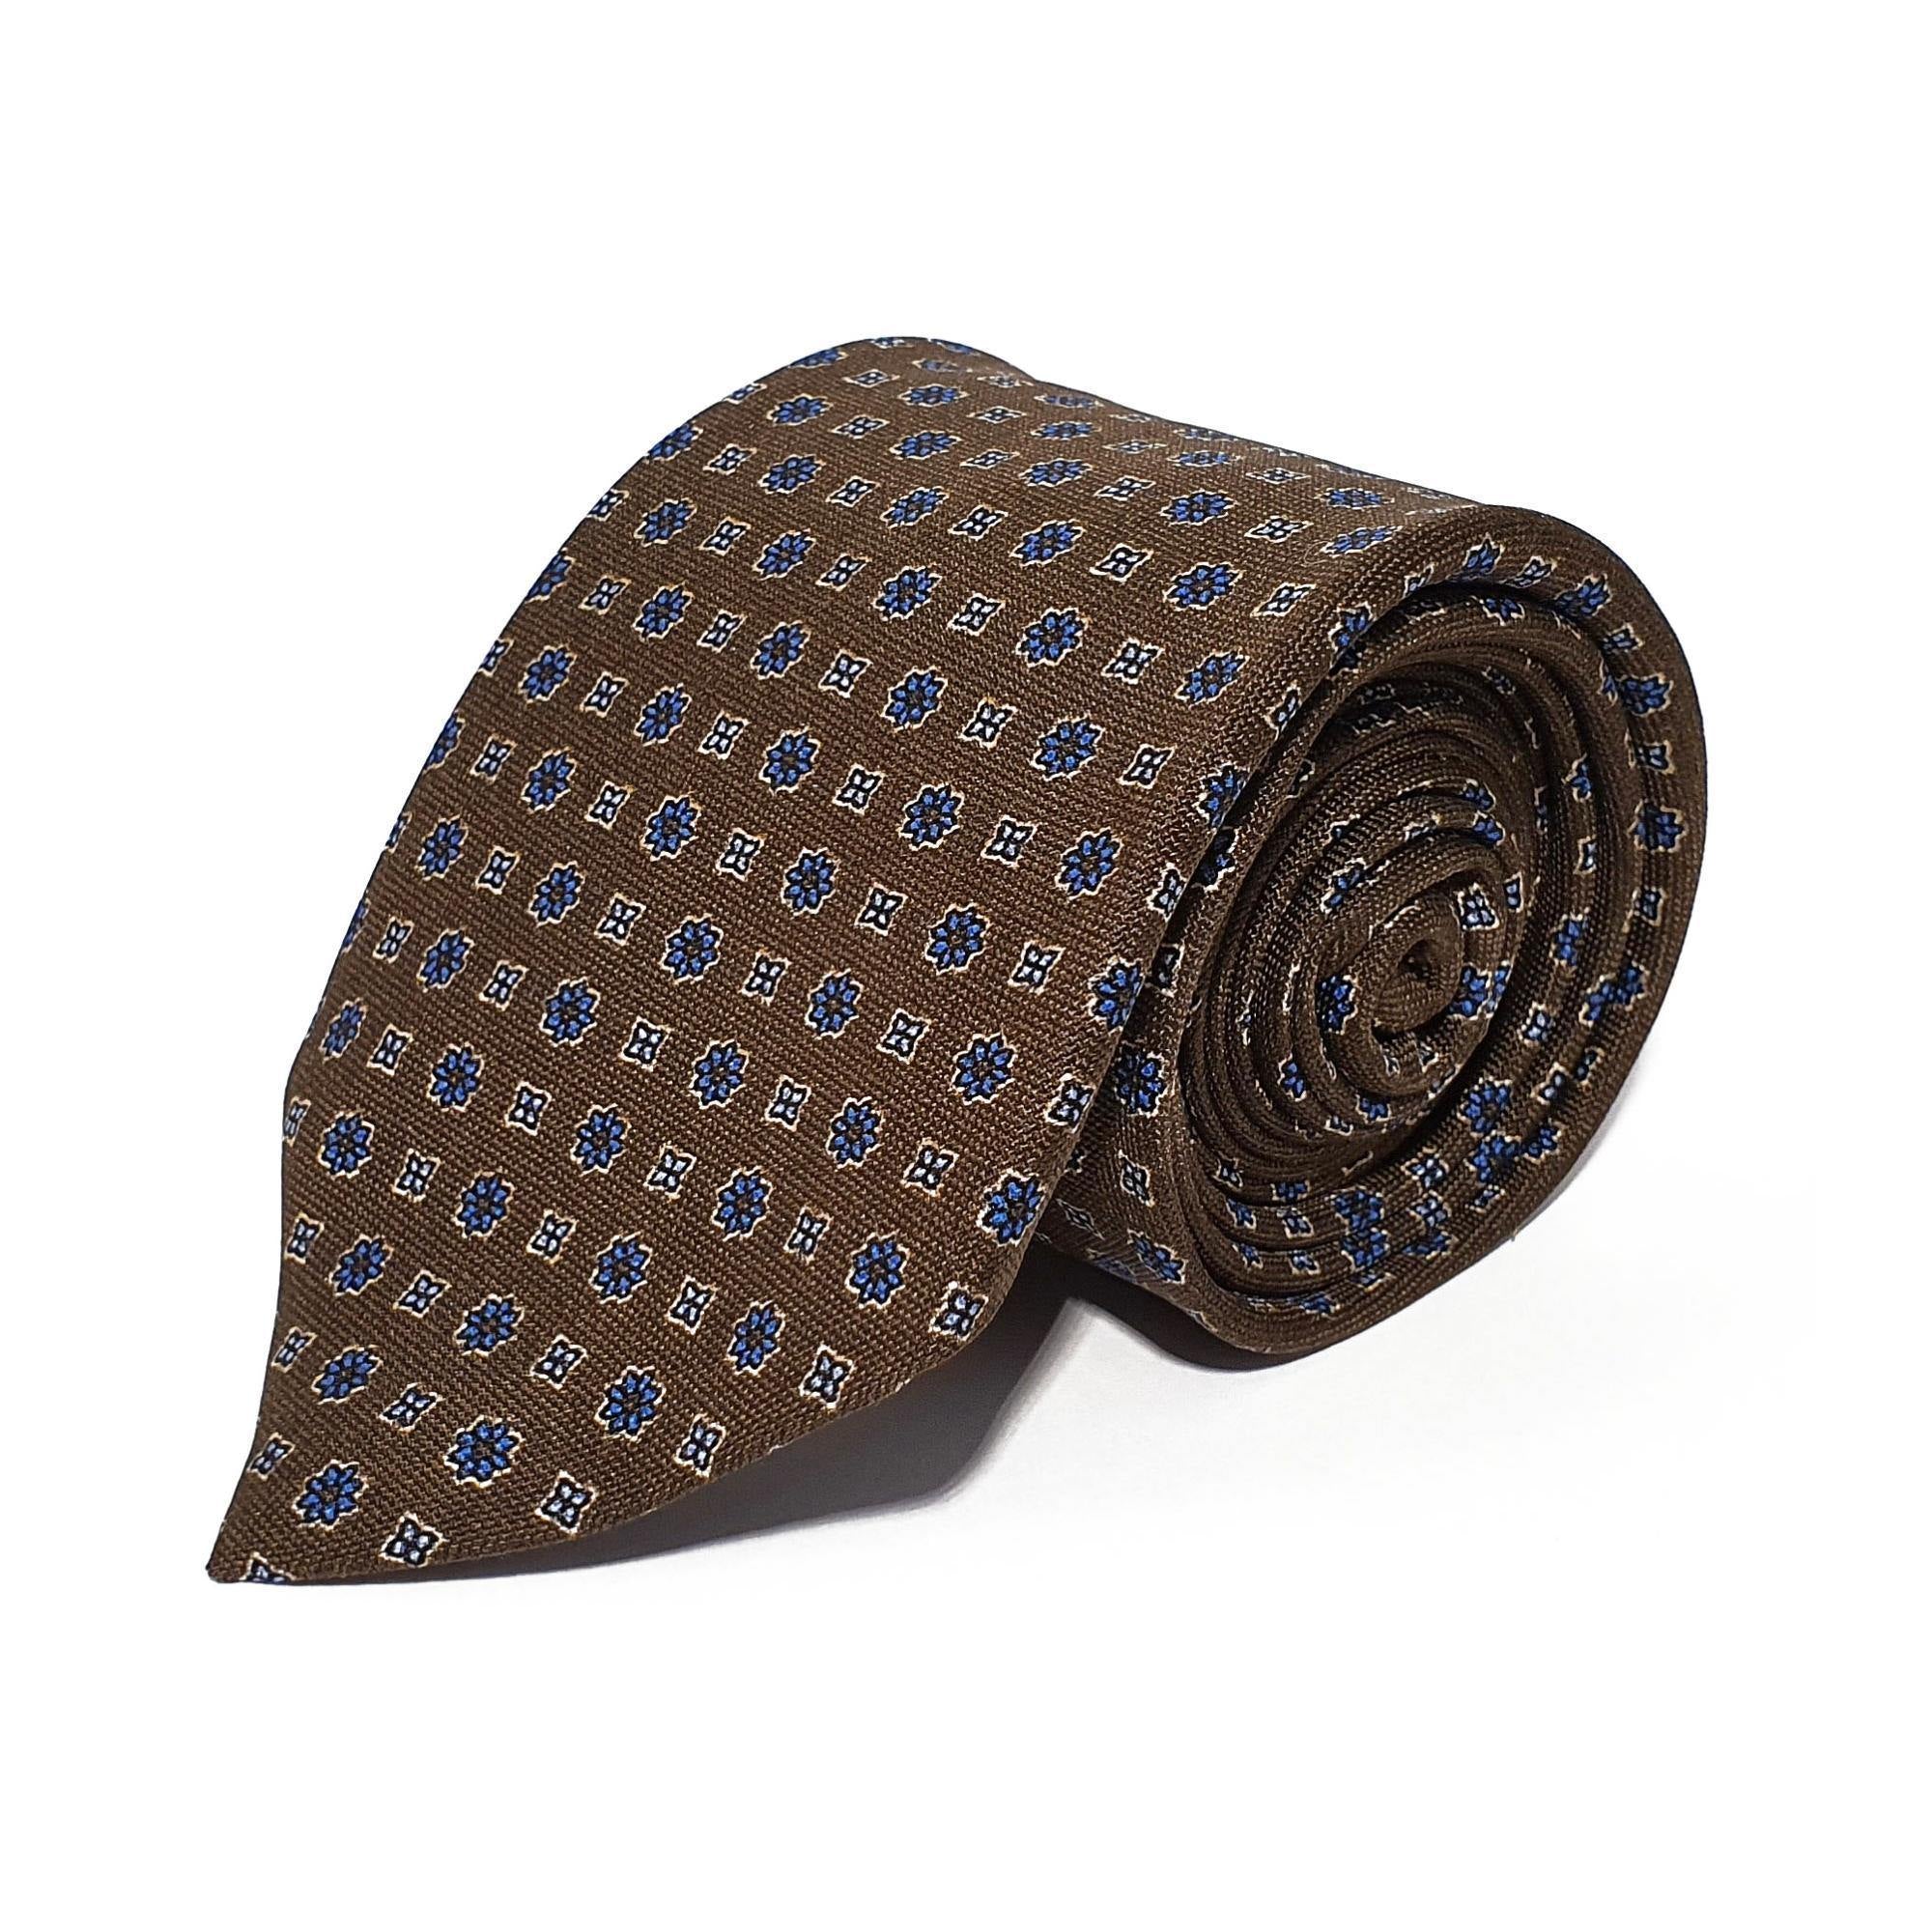 Brown Neats Printed Silk Tie Hand Finished - British Made